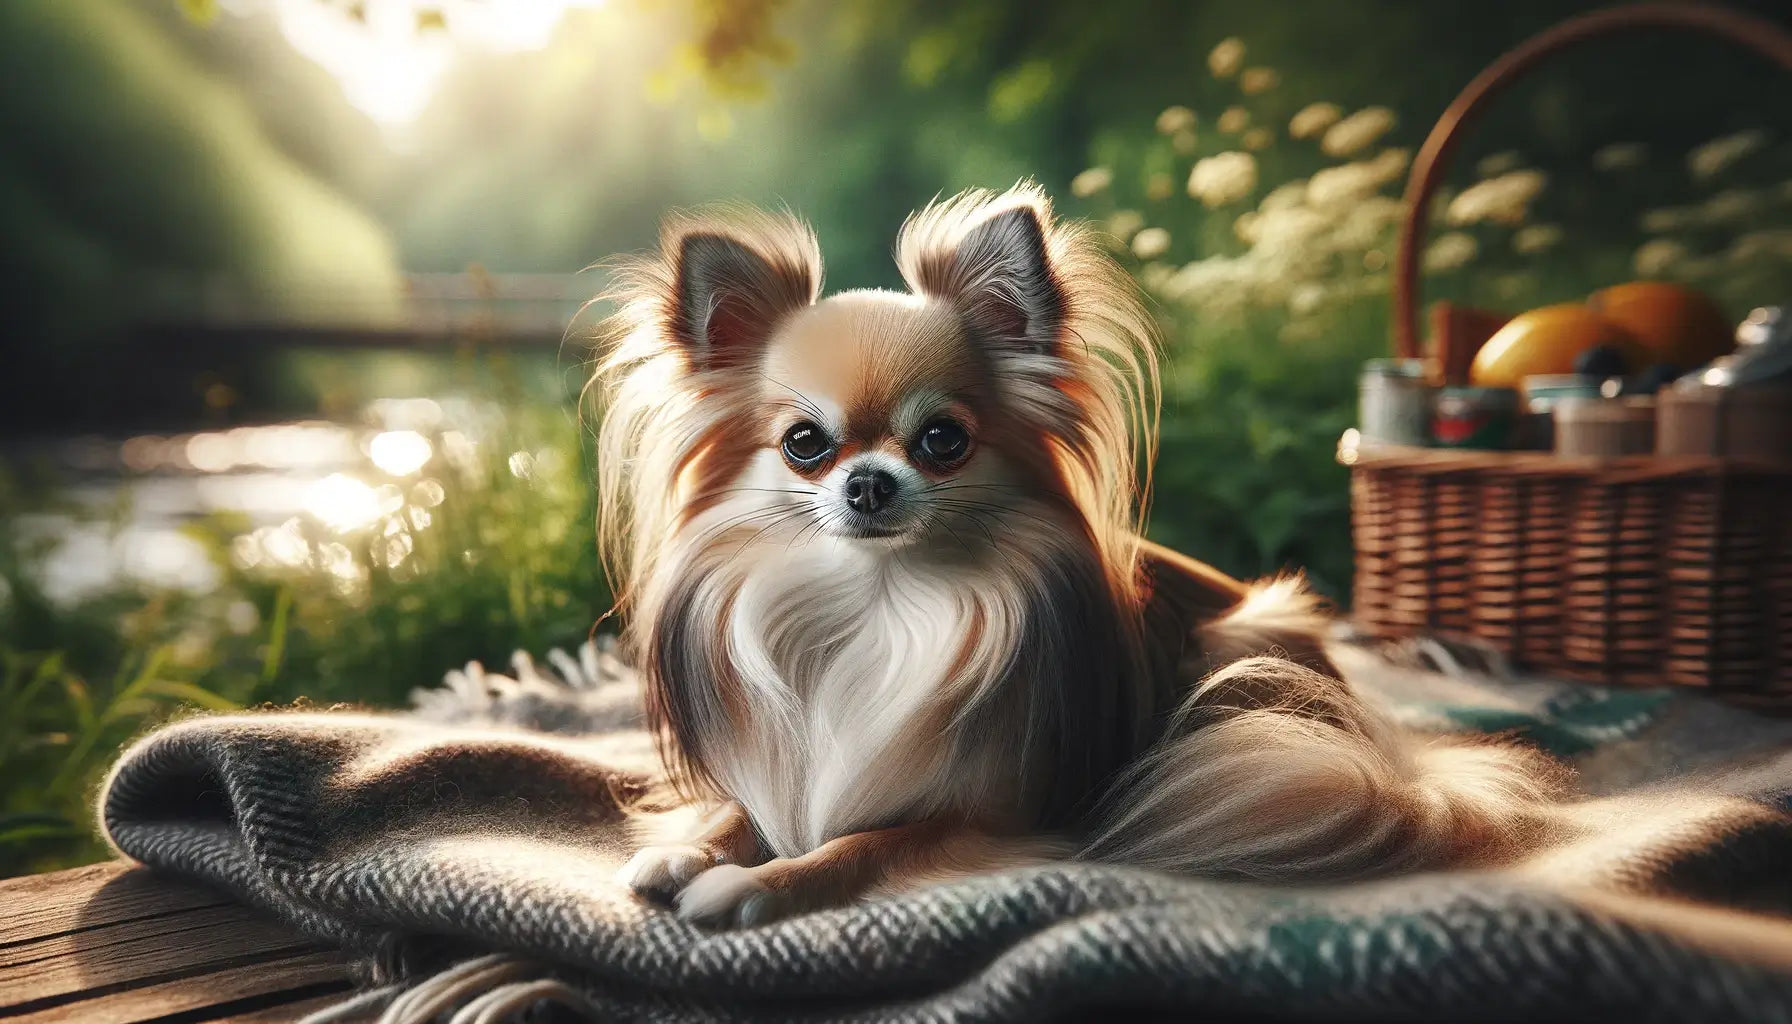 Long-Haired Chihuahua on a blanket outdoors, set against a backdrop of natural greenery.